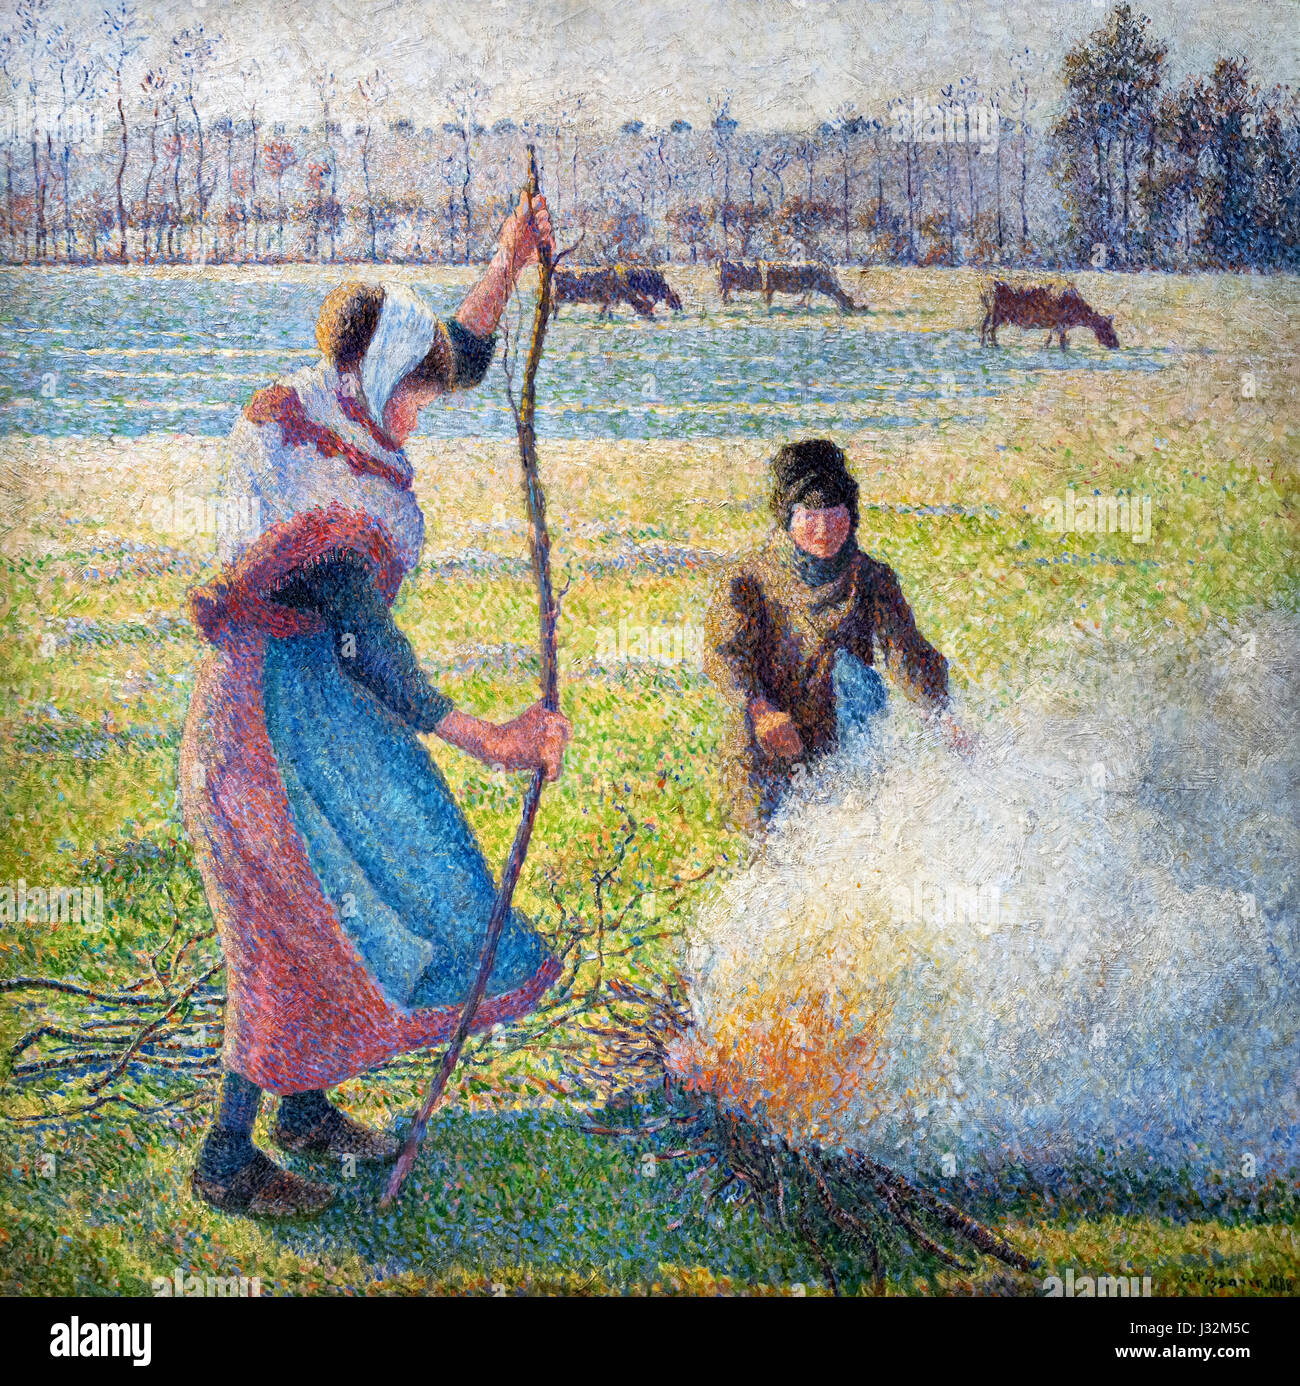 Pissarro. Painting entitled 'Gelée Blanche, Jeune Paysanne Faisant du Feu' (Hoarfrost, Peasant Girl Making a Fire) by Camille Pissarro (1830-1903), oil on canvas, 1888 Stock Photo